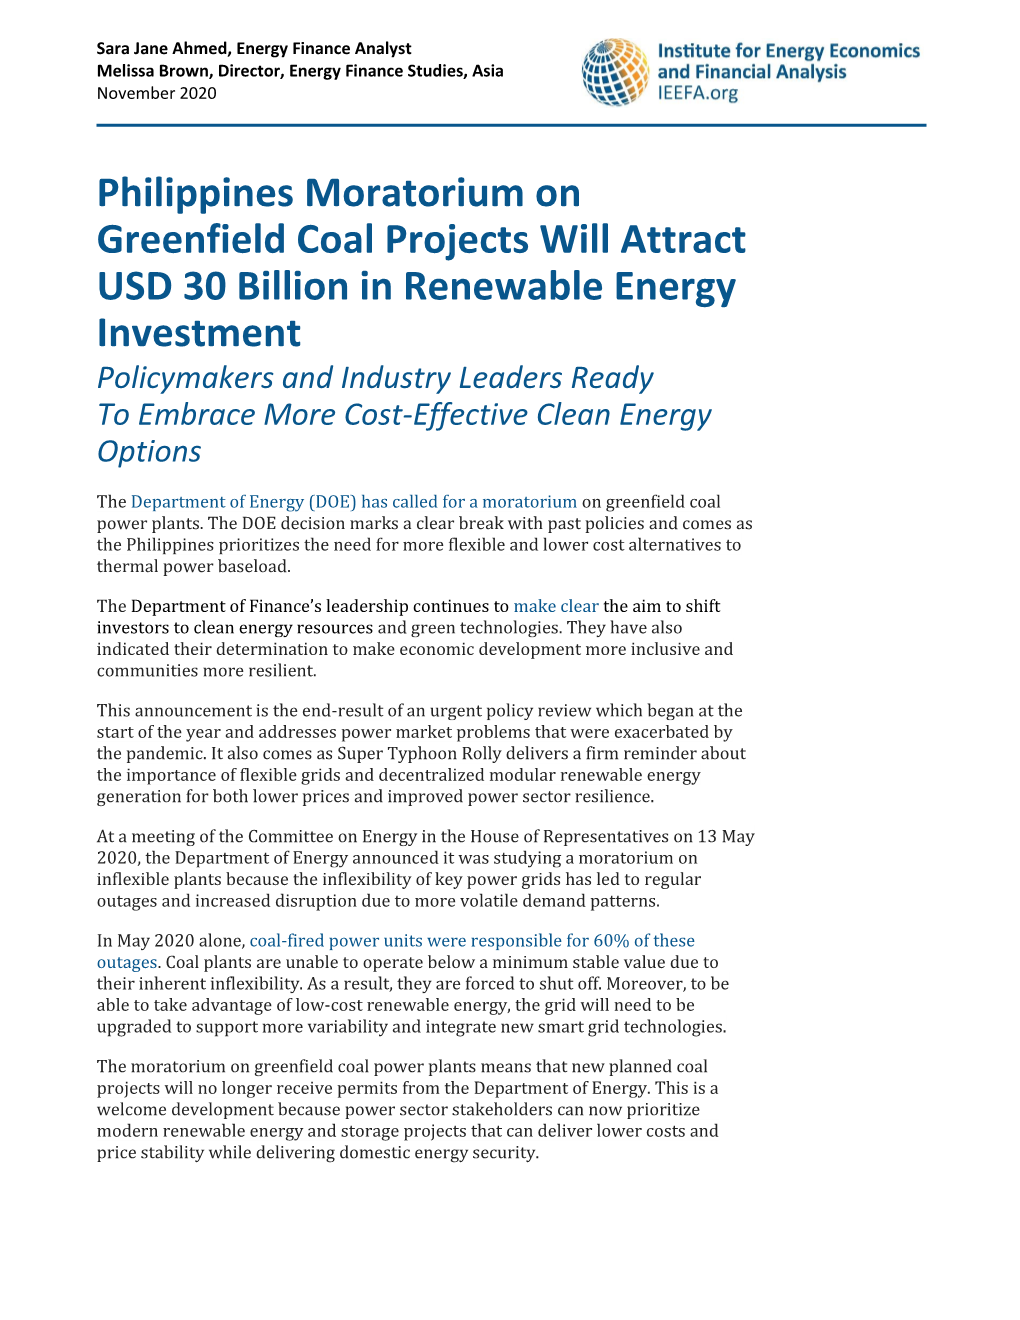 Philippines Moratorium on Greenfield Coal Projects Will Attract USD 30